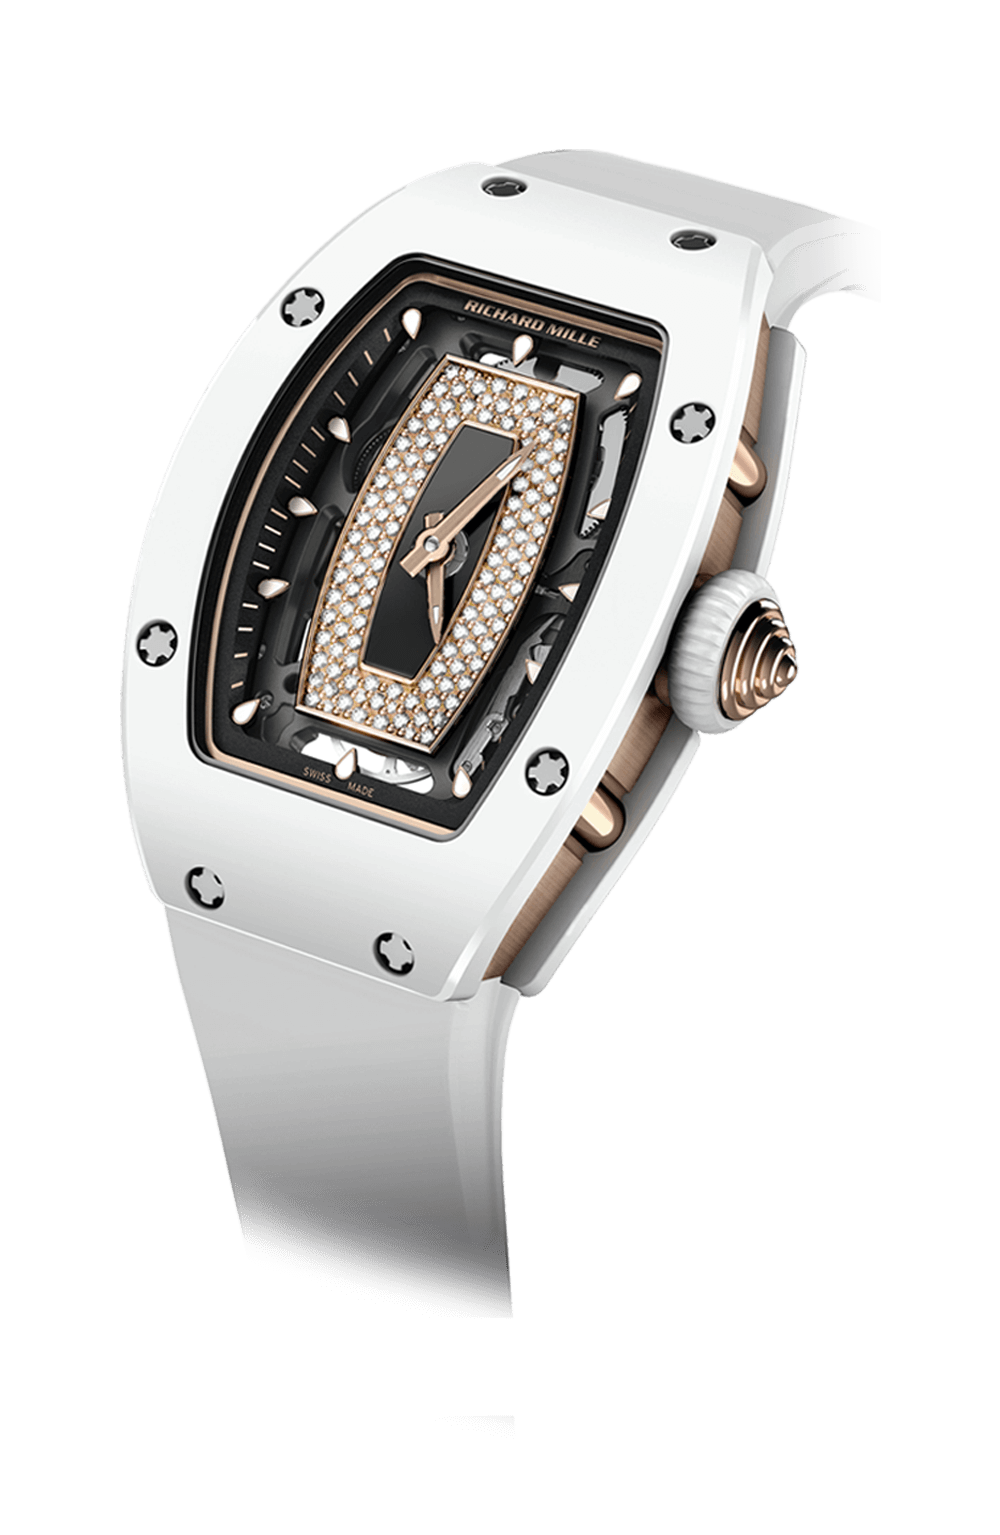 Richard Mille RM-032 Automatic Chronograph Diver, Skeleton Dial - Rose Gold on Strap